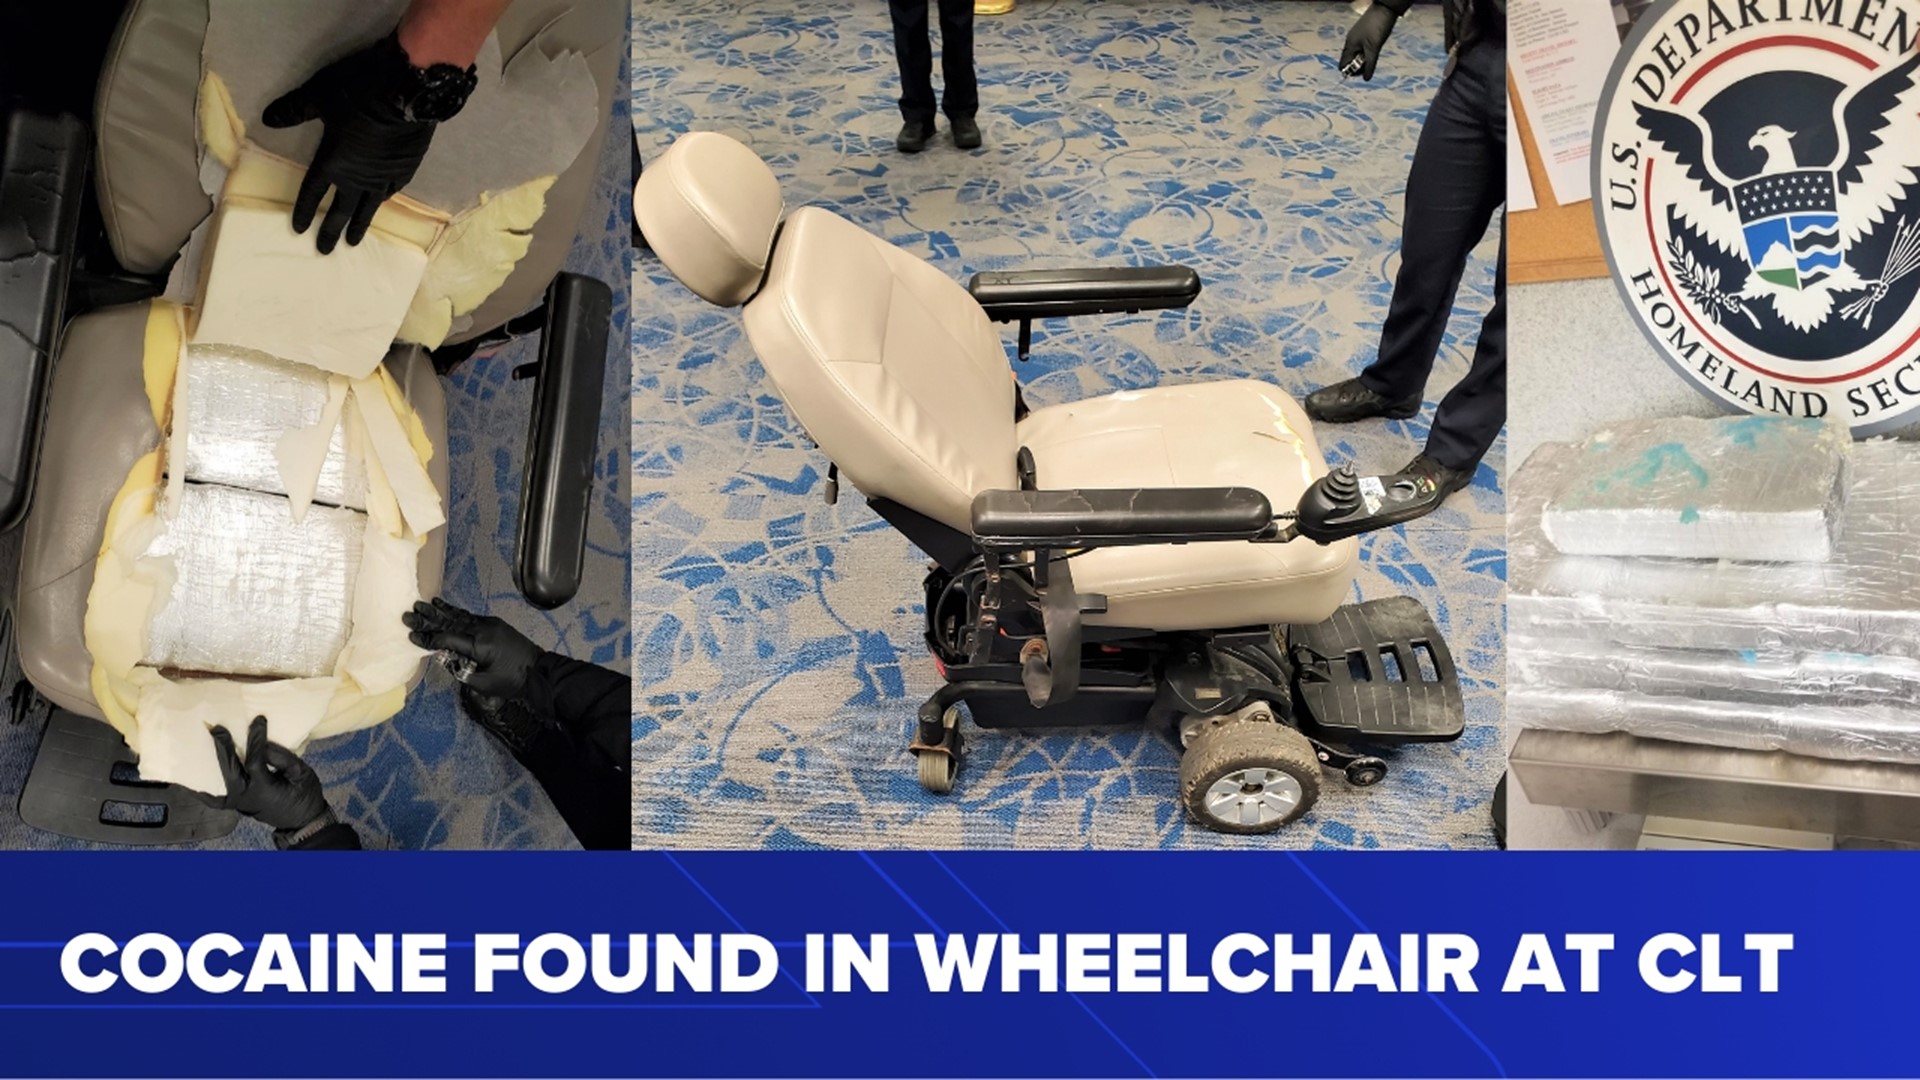 A total of four packages containing over 23 pounds of cocaine discovered inside the wheelchair had an estimated street value of $378,000.